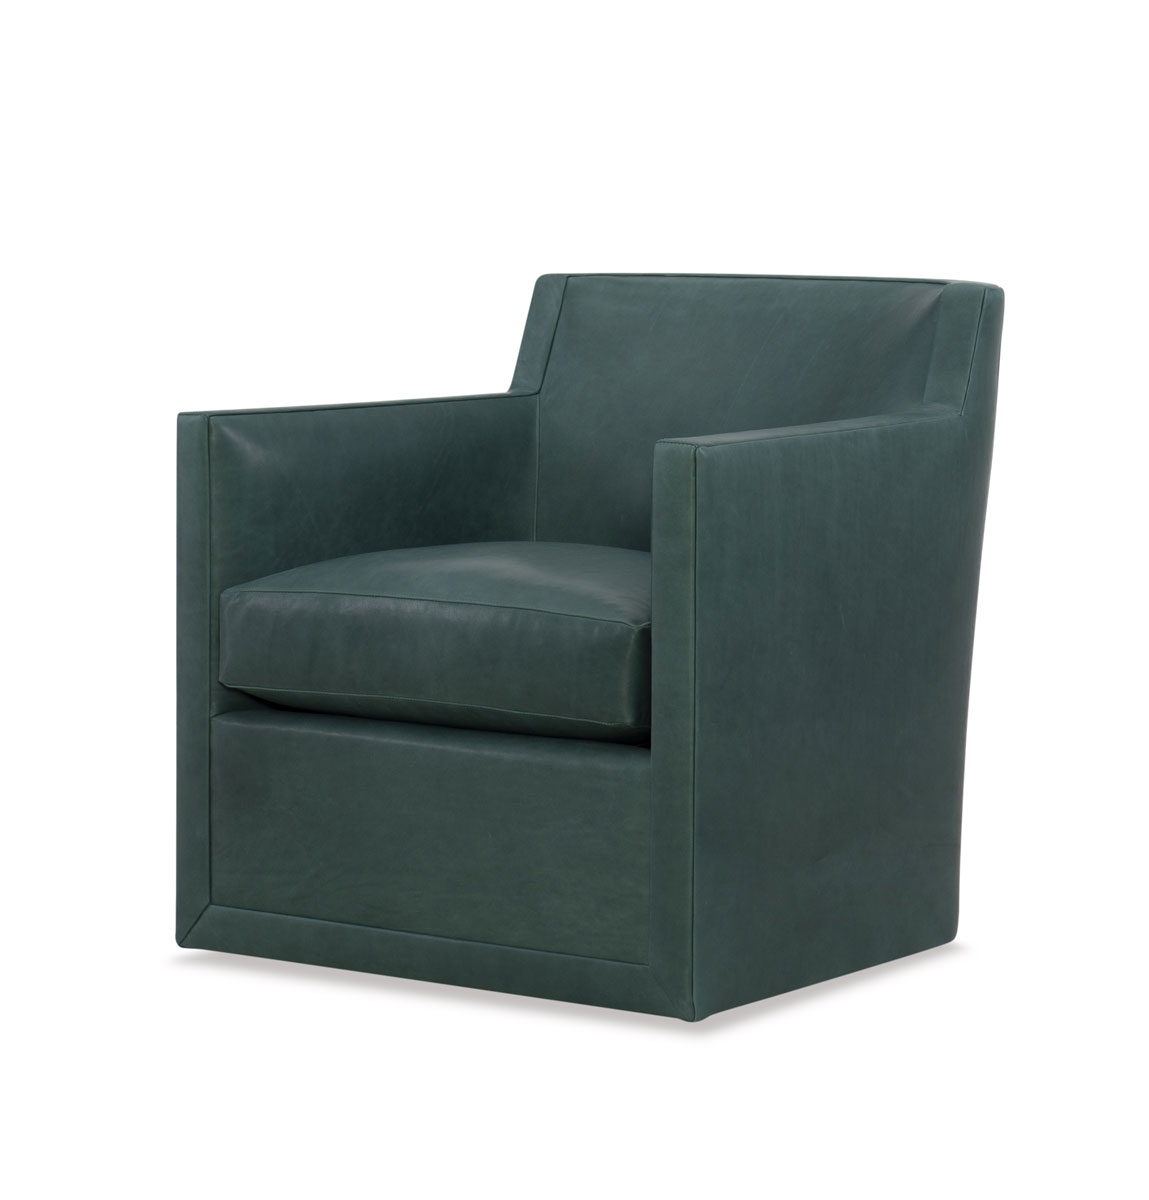 Wesley Hall L532 Thedford Swivel Chair